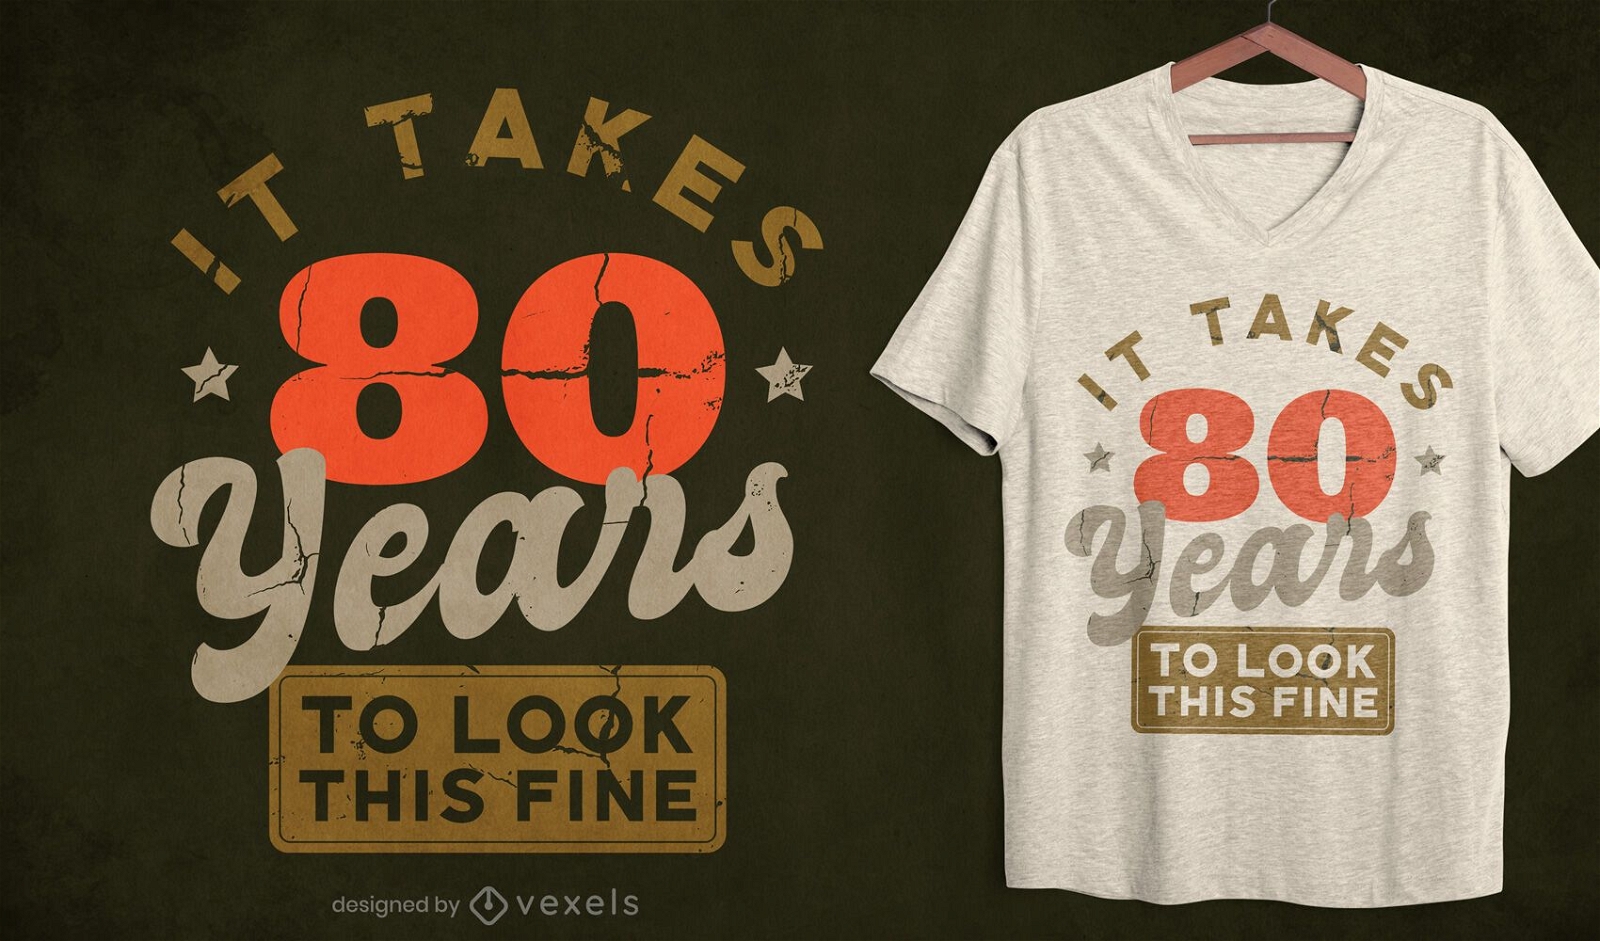 Years to look fine t-shirt design